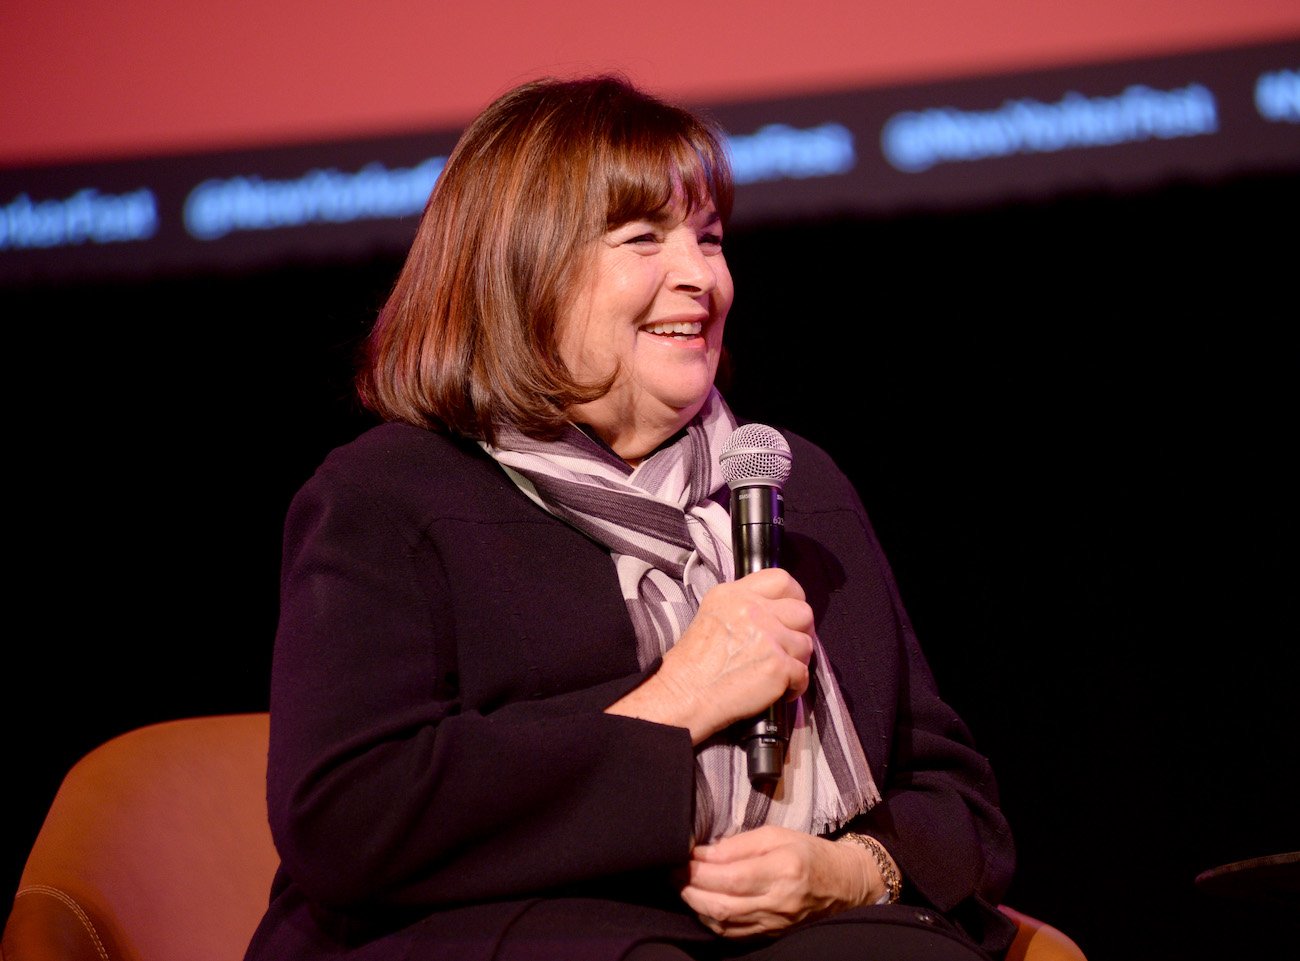 Ina Garten speaks into a microphone wearing a black top and scarf